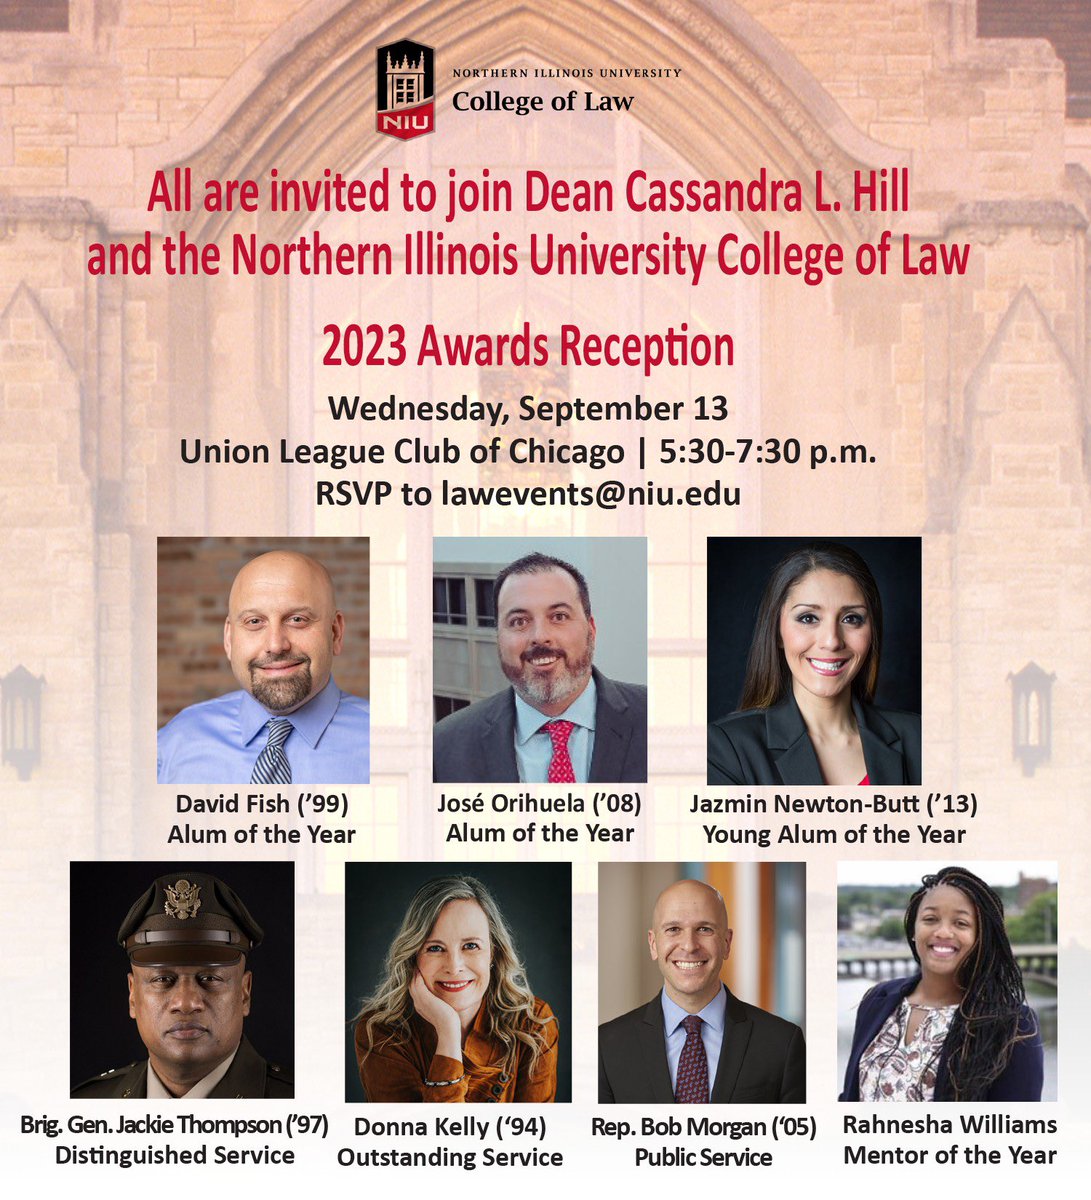 Congrats to the 2023 NIU Law Award Recipients! Please join us at the Awards Reception, Wed, Sept 13 5:30-7:30 pm at the Union League Club of Chicago . Hors d'oeuvres and drinks provided. RSVP to lawevents@niu.edu by Sept 8 #niulaw #niulawhasitall #NIULawIs4You #niulawproud